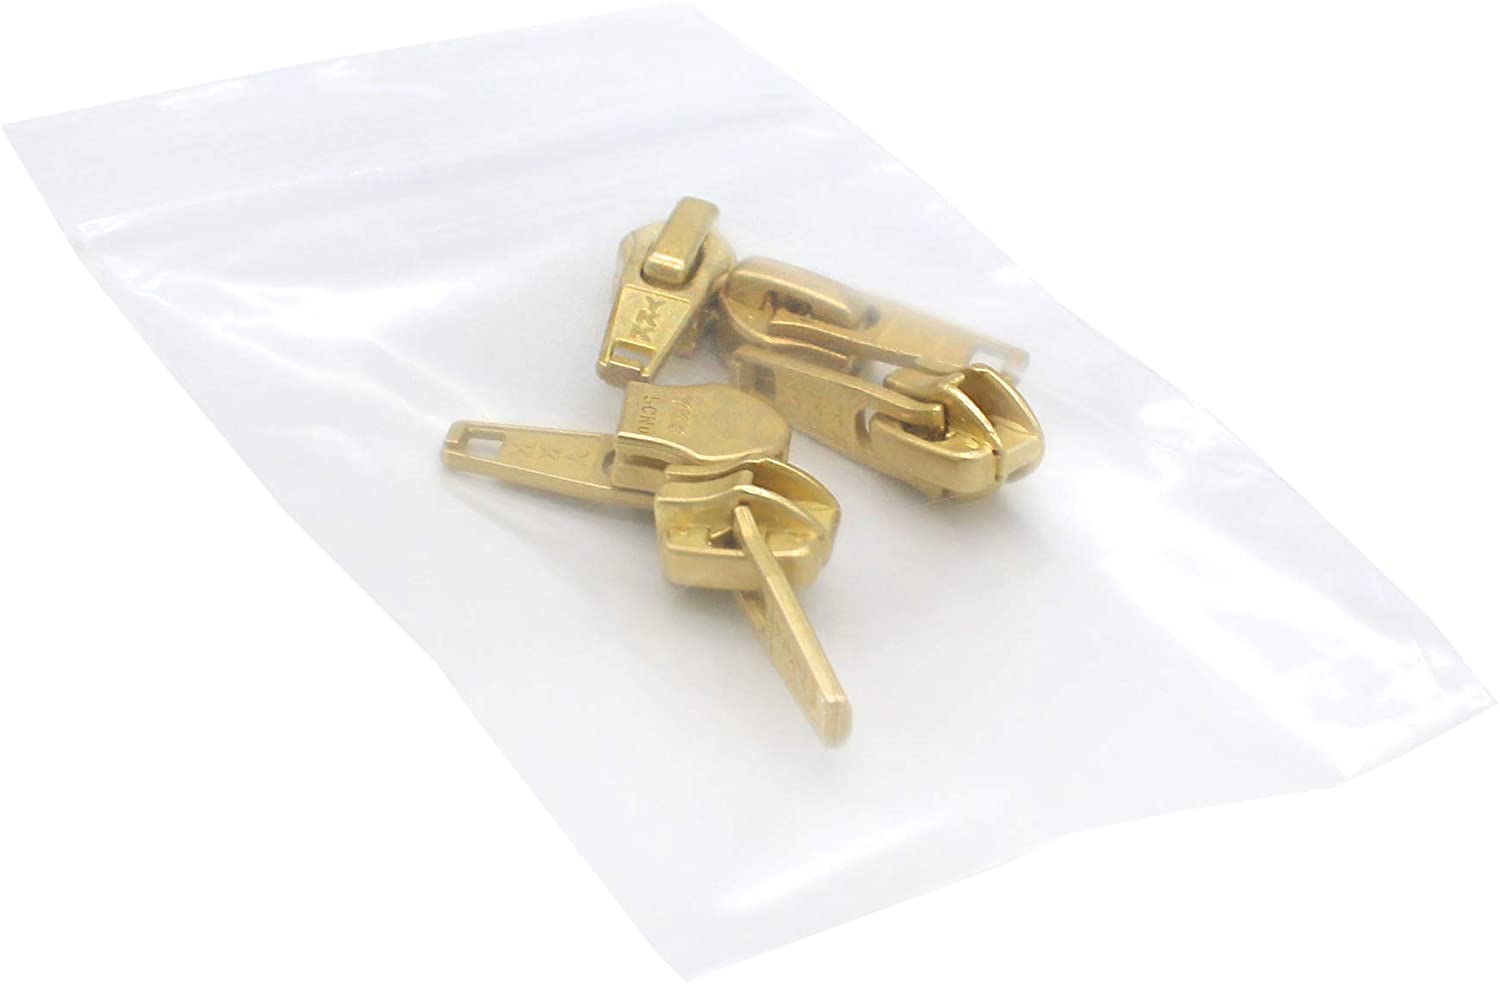 Zipper Repair Kit - #5 YKK Vislon Molded Jacket Zipper Sliders with Top  Stops Included - Color: Beige #573 - Choose Your Quantity - Made in The  United